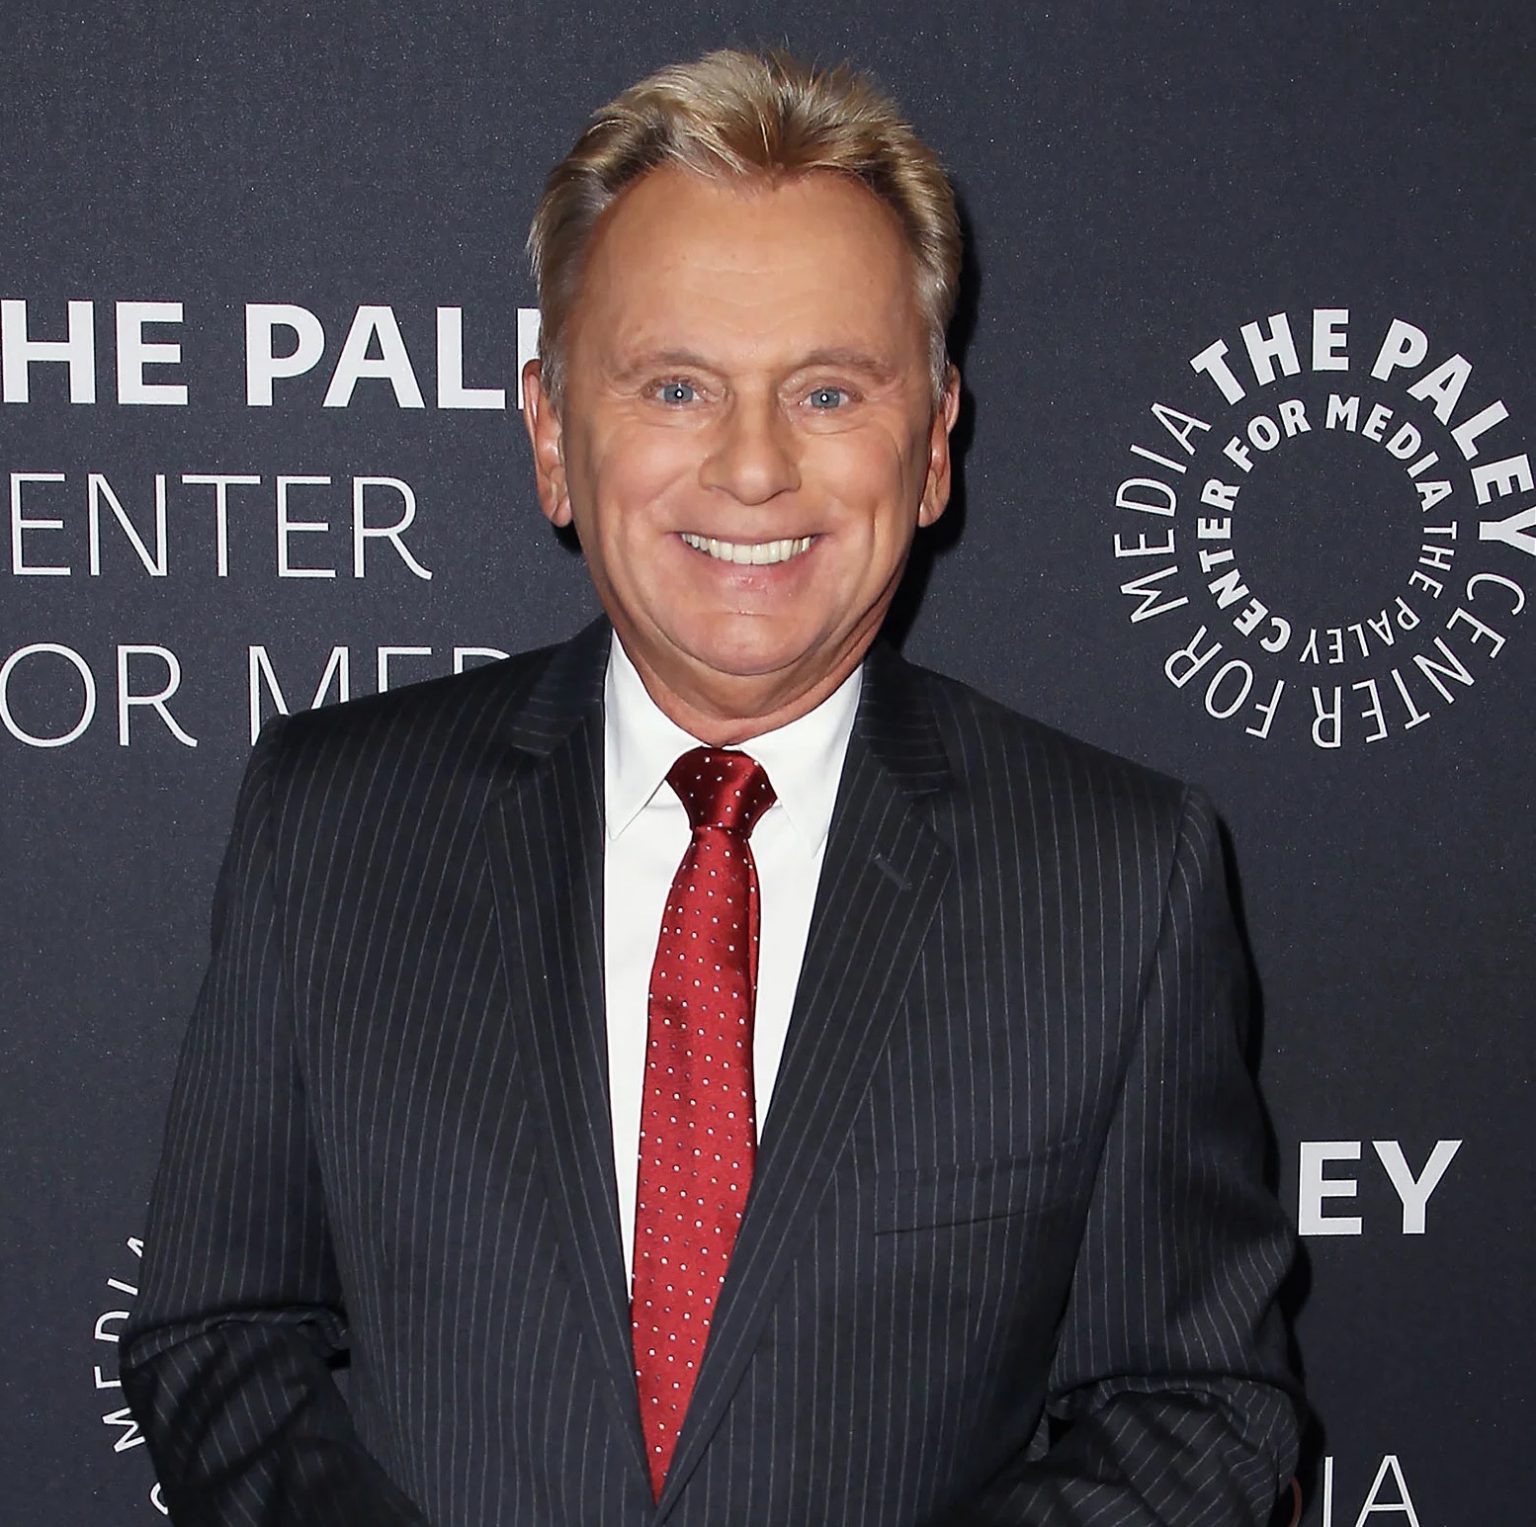 Pat Sajak is the proud father of two children meeting the Star's